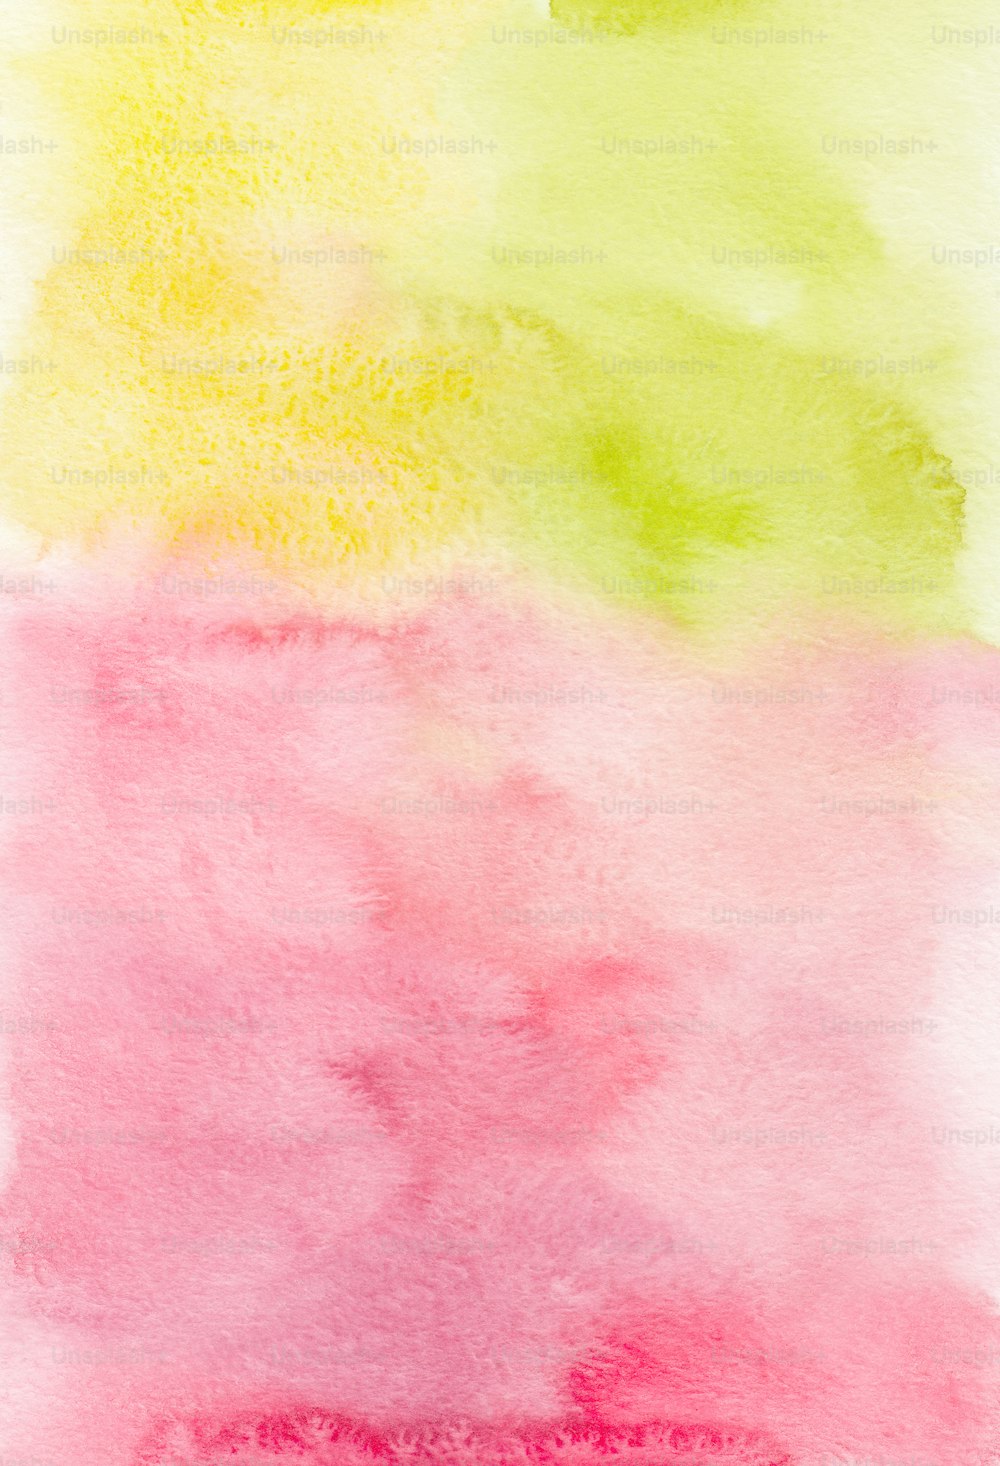 a watercolor painting of different shades of pink, yellow, and green